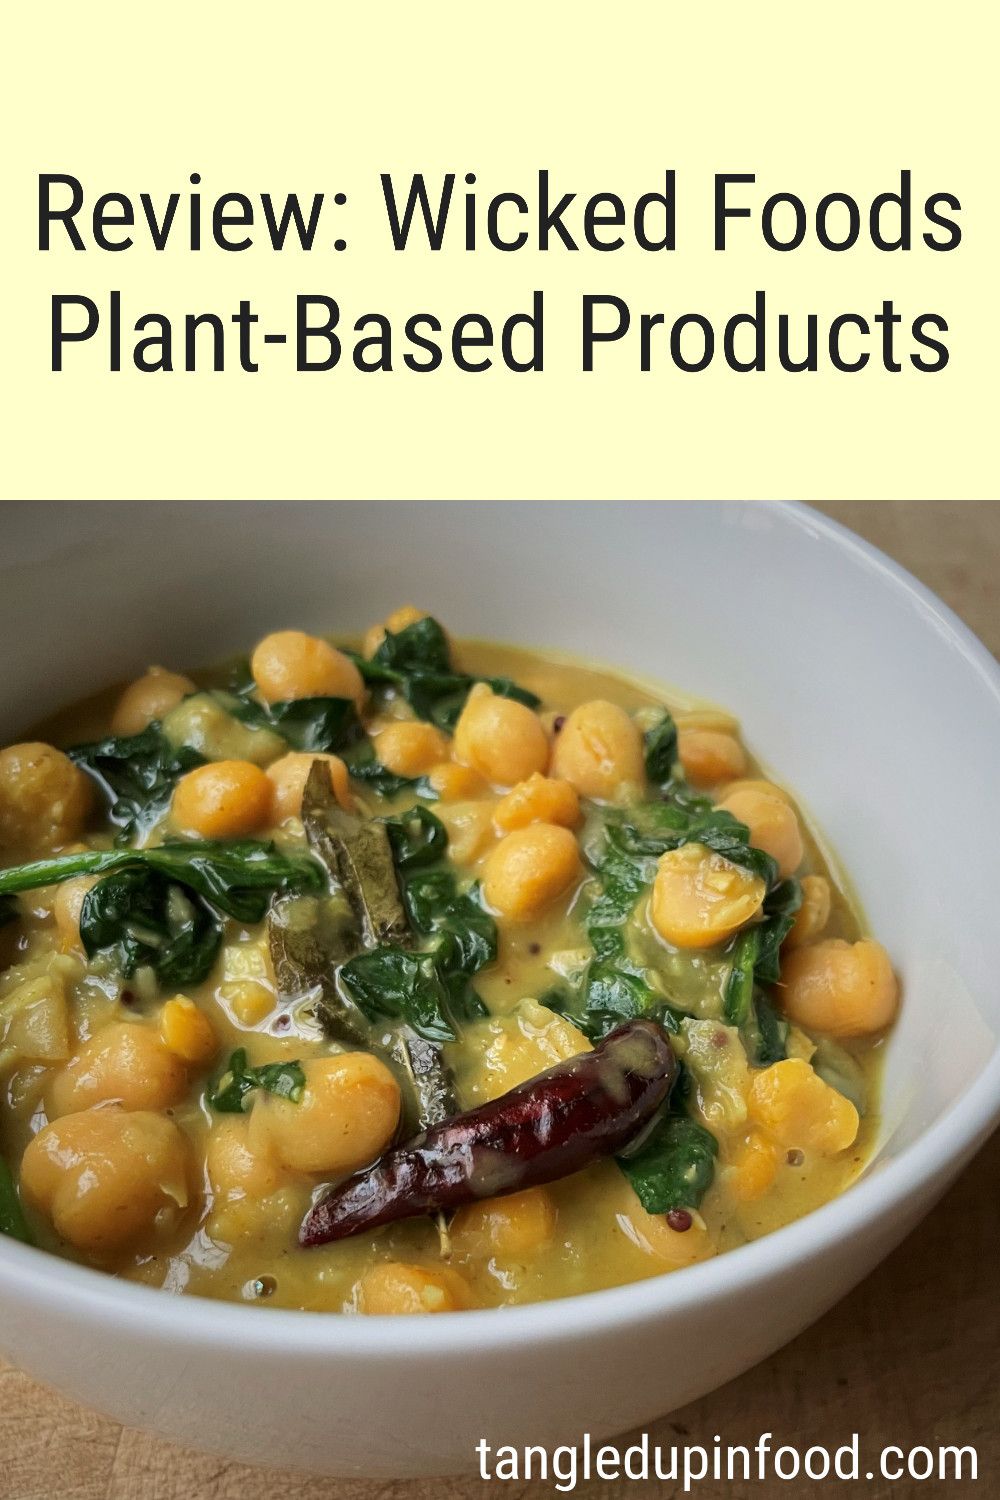 Picture of bowl filled with chickpeas and spinach in a yellow sauce and text reading "Review: Wicked Kitchen Plant-Based Products"